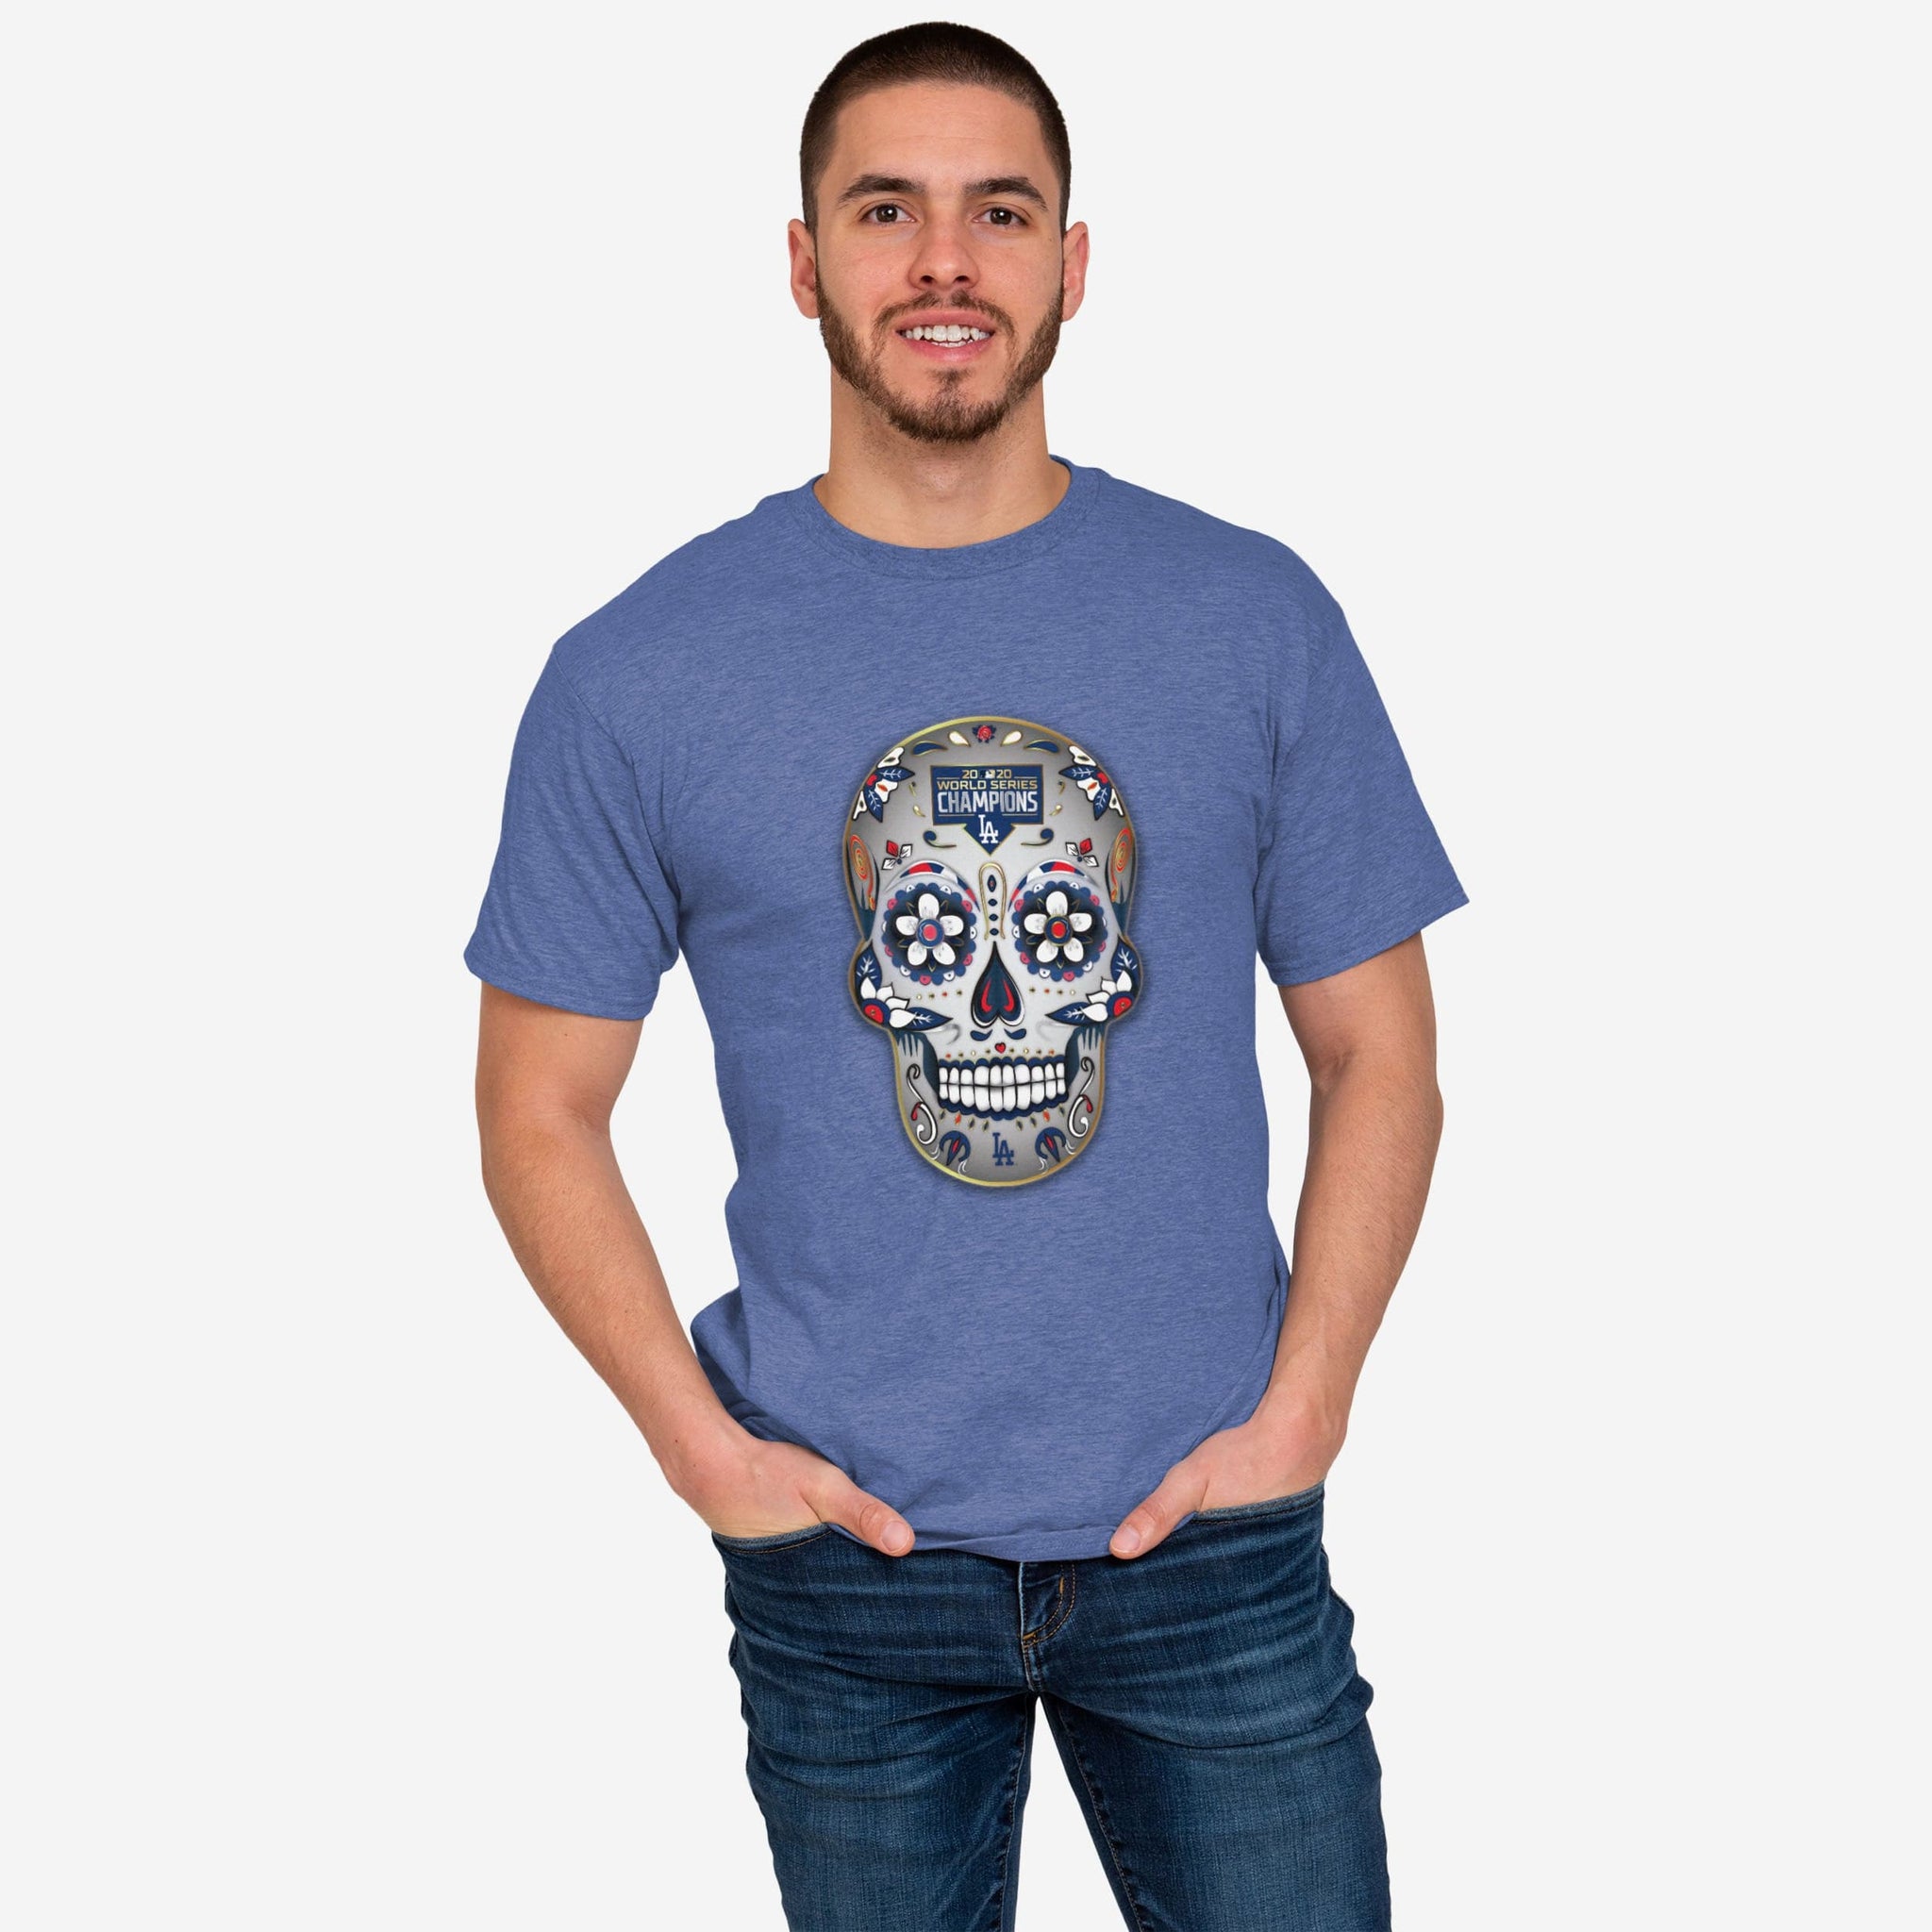 49ers day of the dead shirt